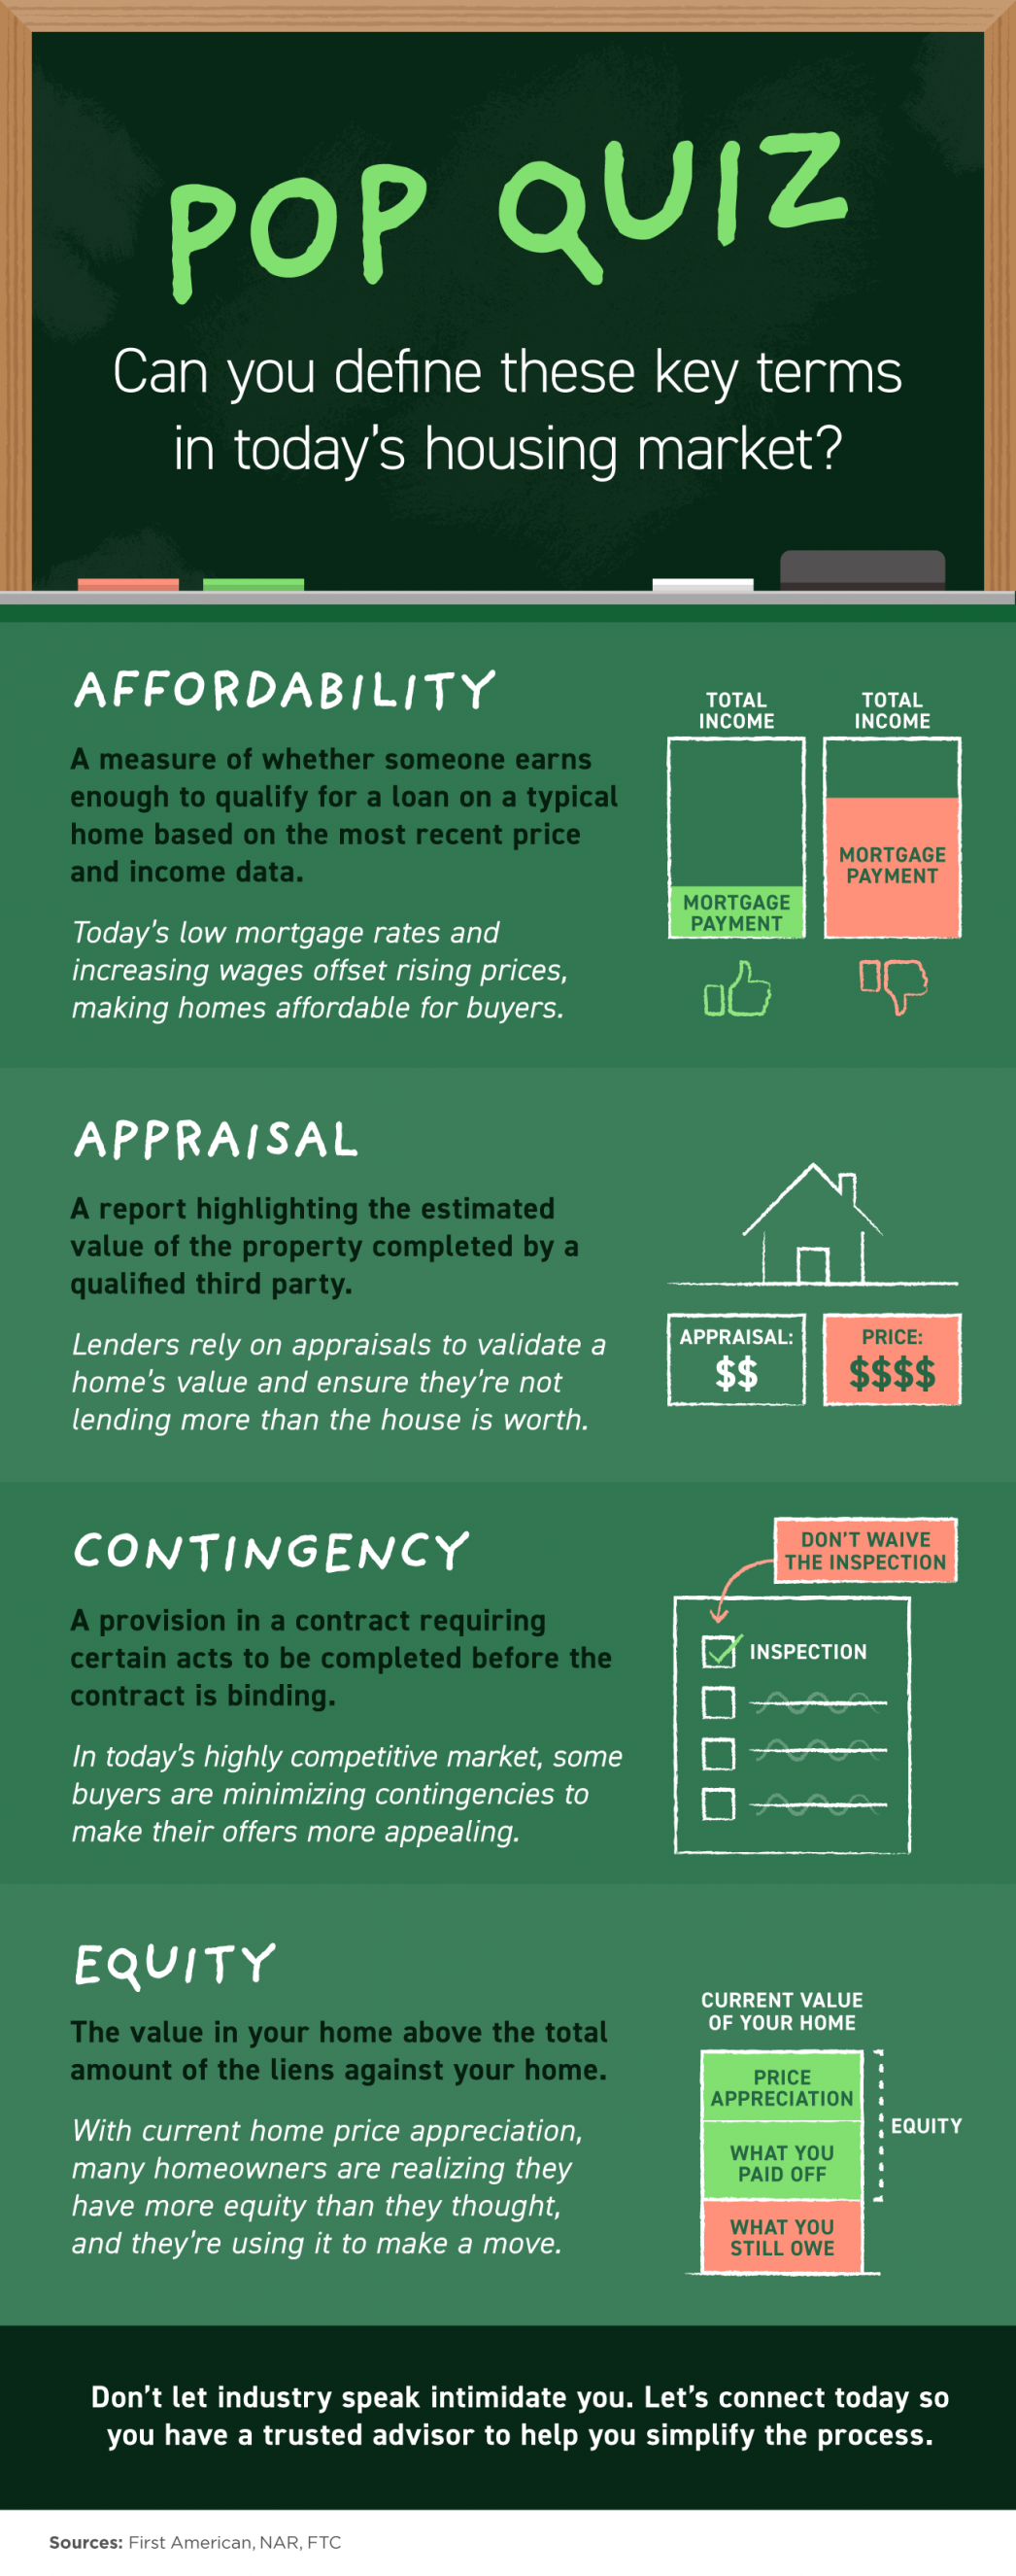 Pop Quiz: Can You Define These Key Terms in Today’s Housing Market? [INFOGRAPHIC] | MyKCM